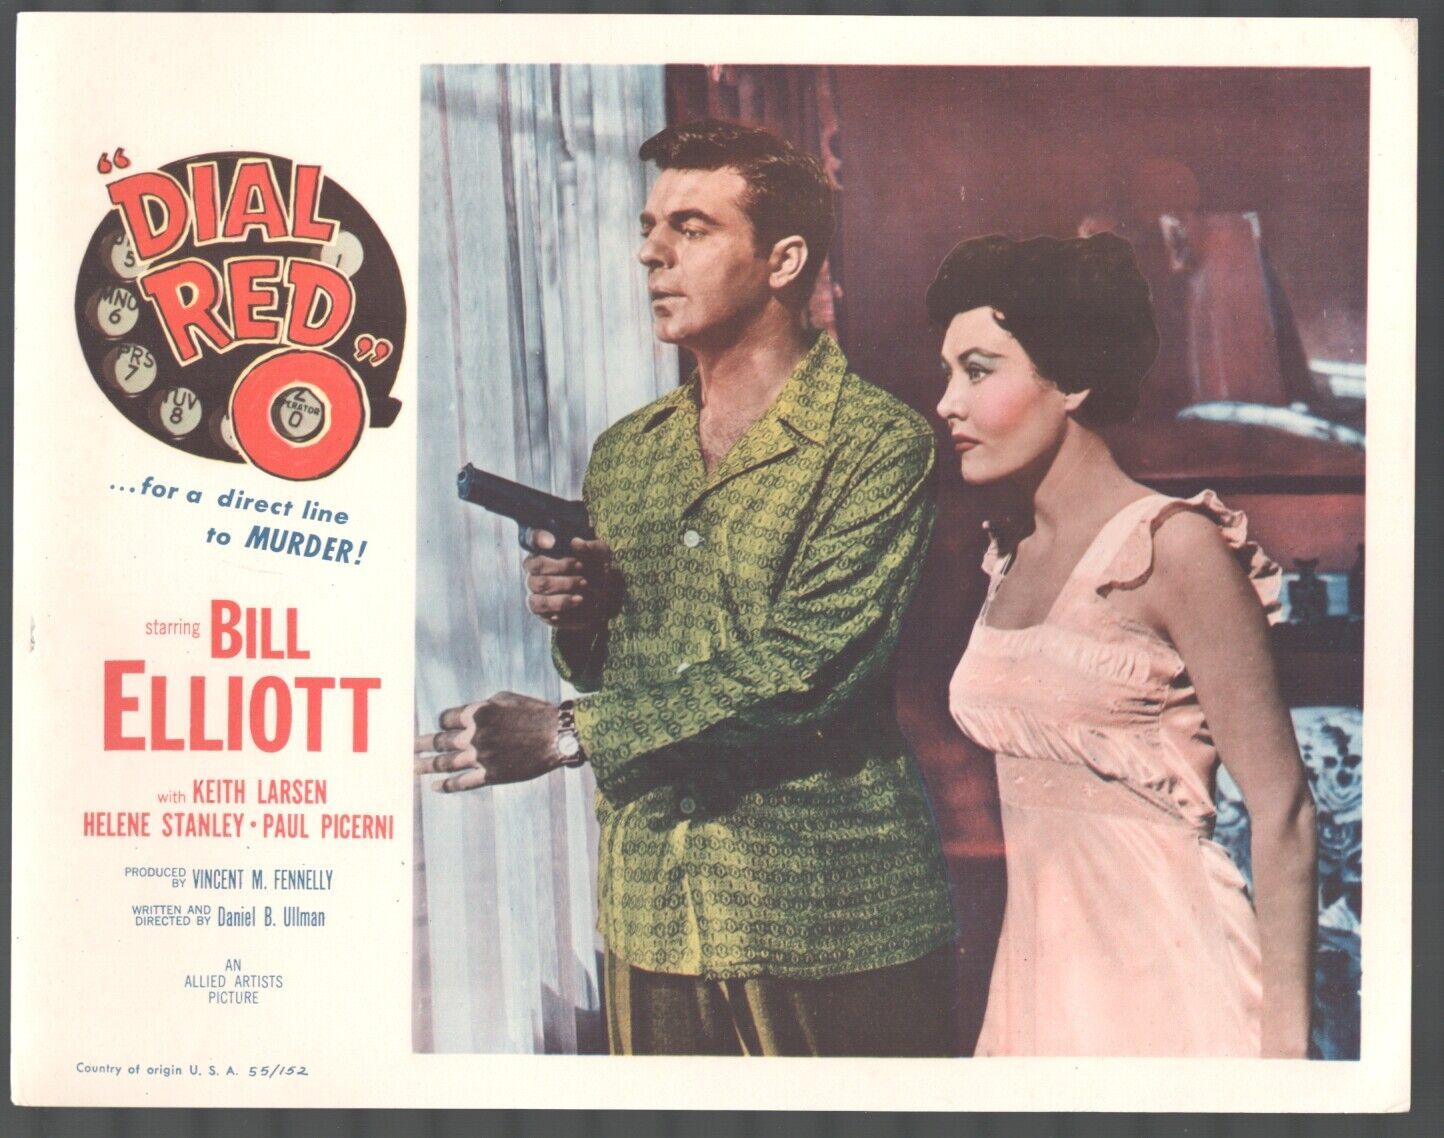 Primary image for Dial Red O 11x14 Lobby Card Keith Larsen Helene Stanley